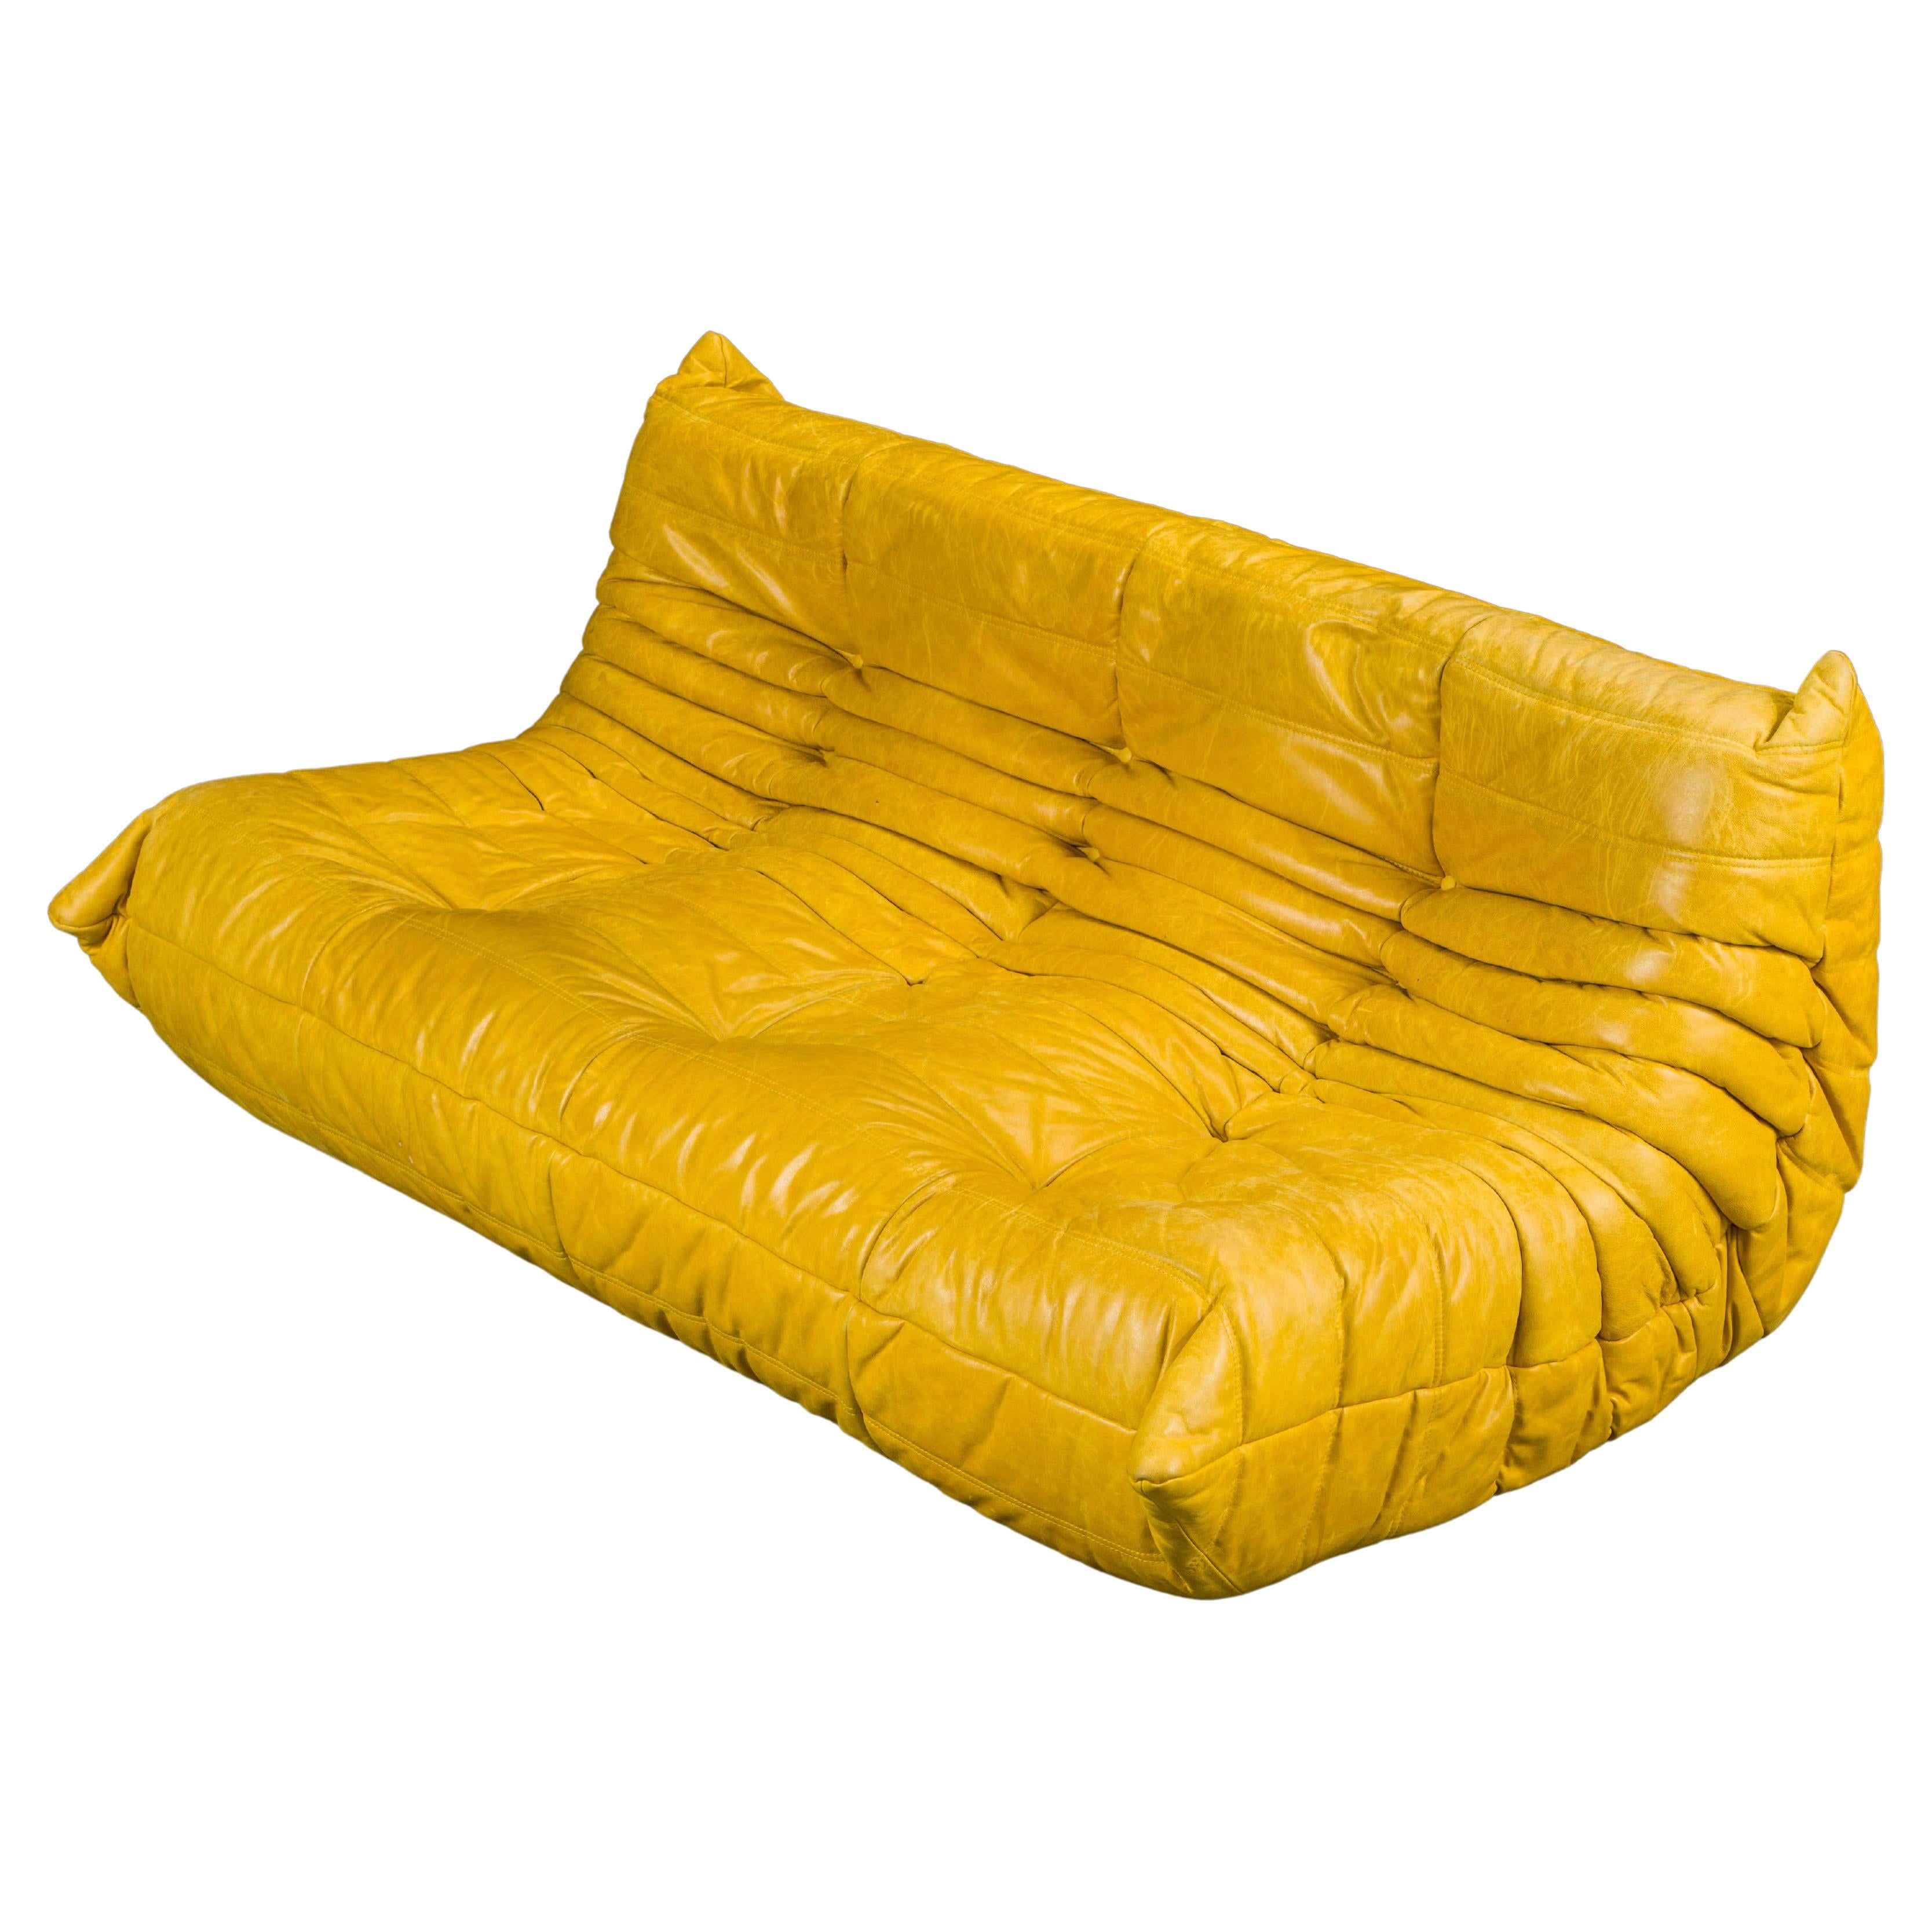 Yellow Leather 'Togo' Three Seat Sofa by Michel Ducaroy for Ligne Roset, Signed